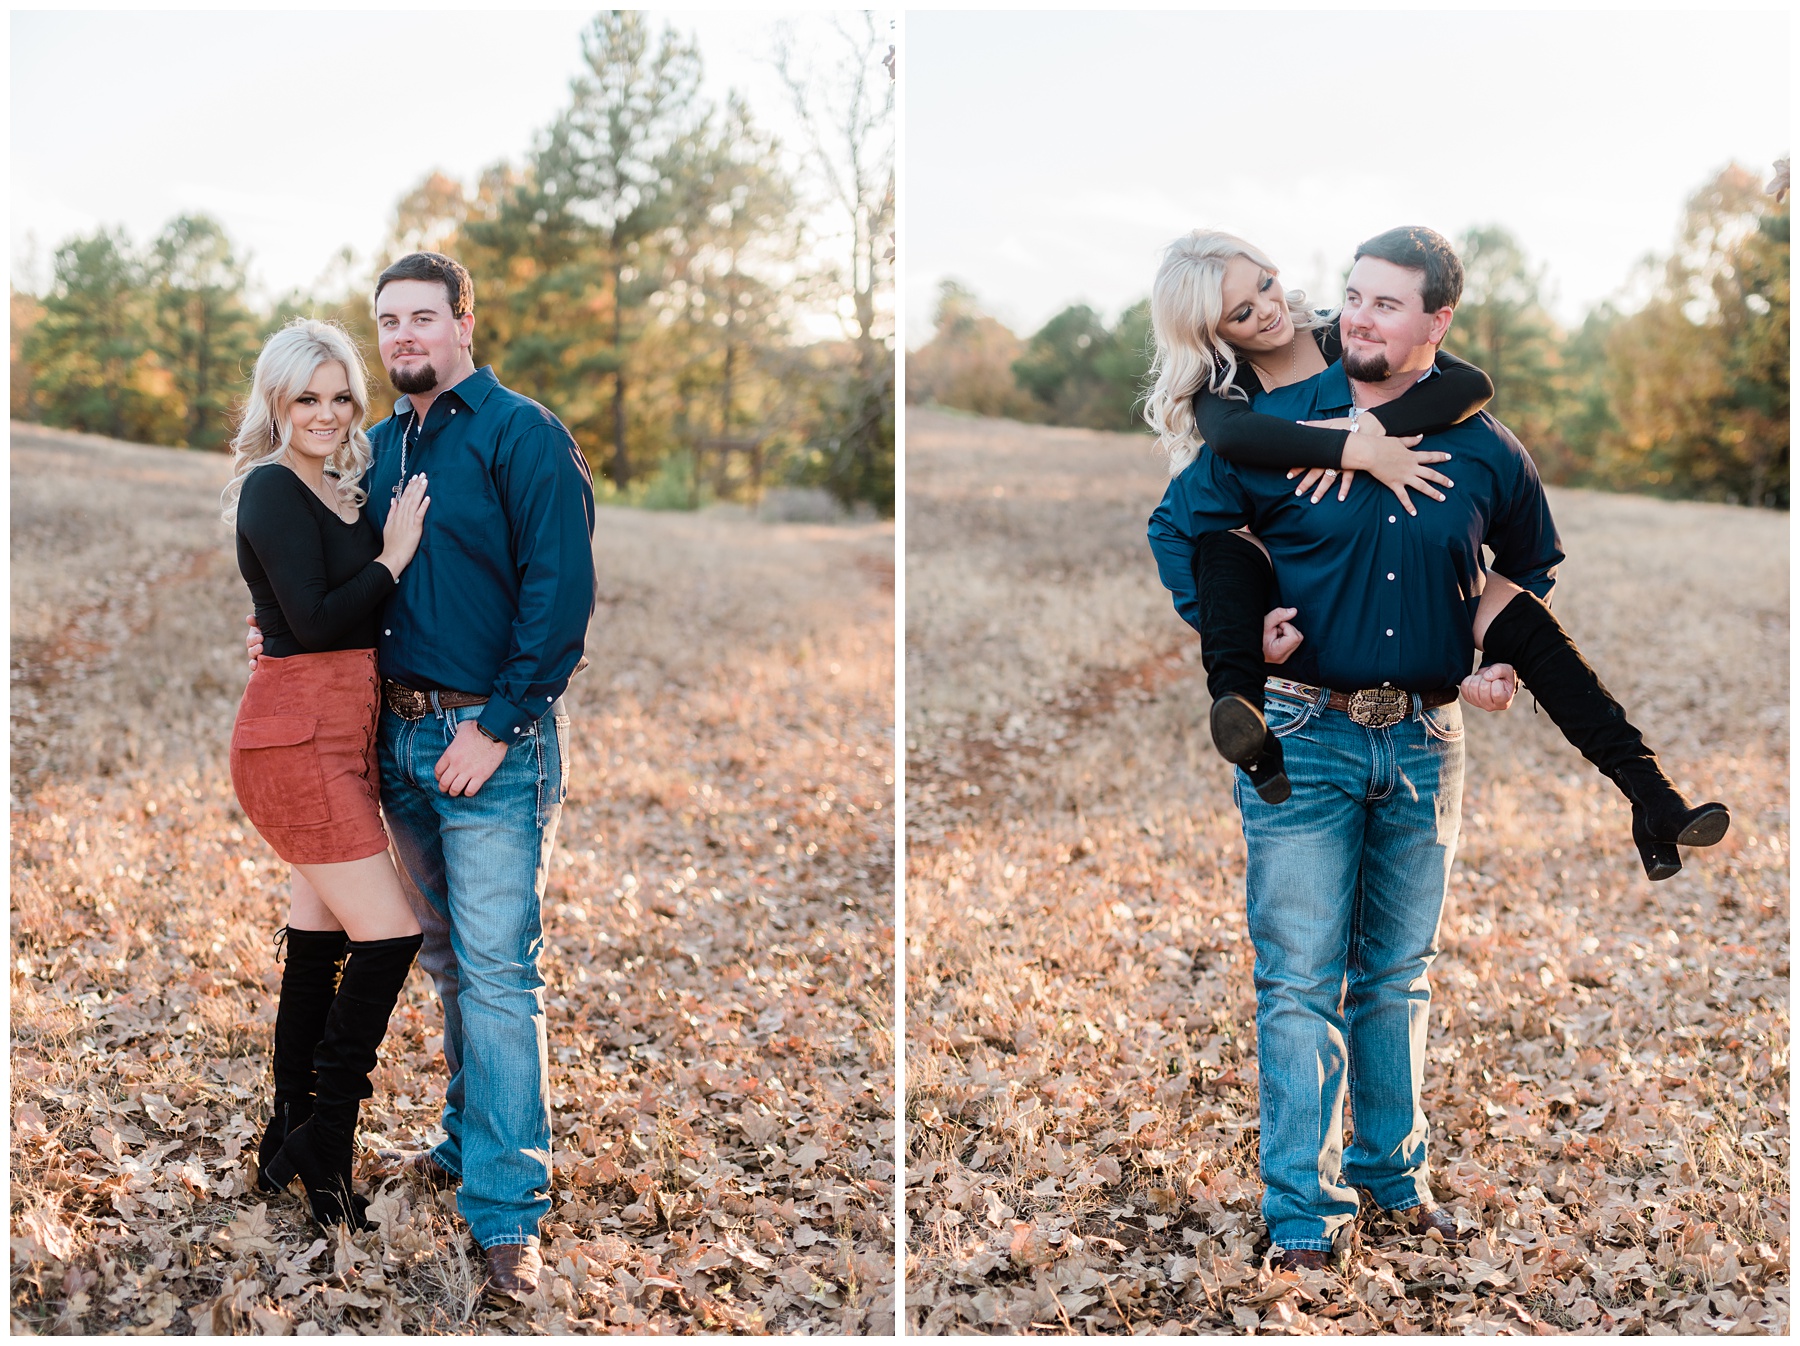 Stylish Fall Outfit | Five Oaks Cabin Engagement Session LaRue TX by East Texas Wedding Photographer Karina Danielle